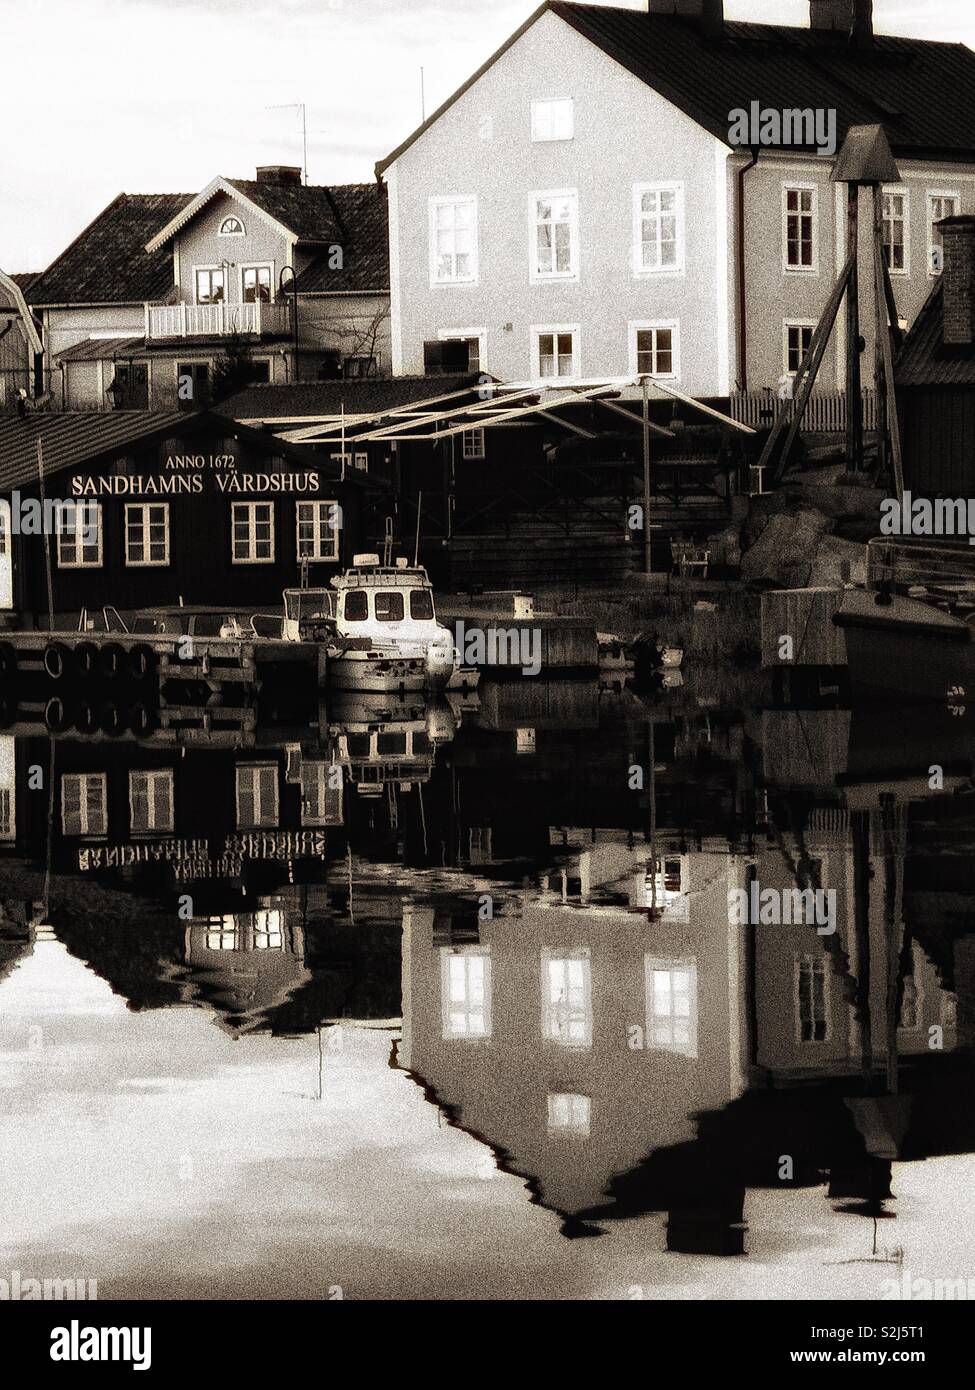 Sandhamn harbour reflection, Sandhamn, Stockholm archipelago, Sweden, Scandinavia. Island in the outer archipelago popular for sailing and yachting since the 19th century Stock Photo